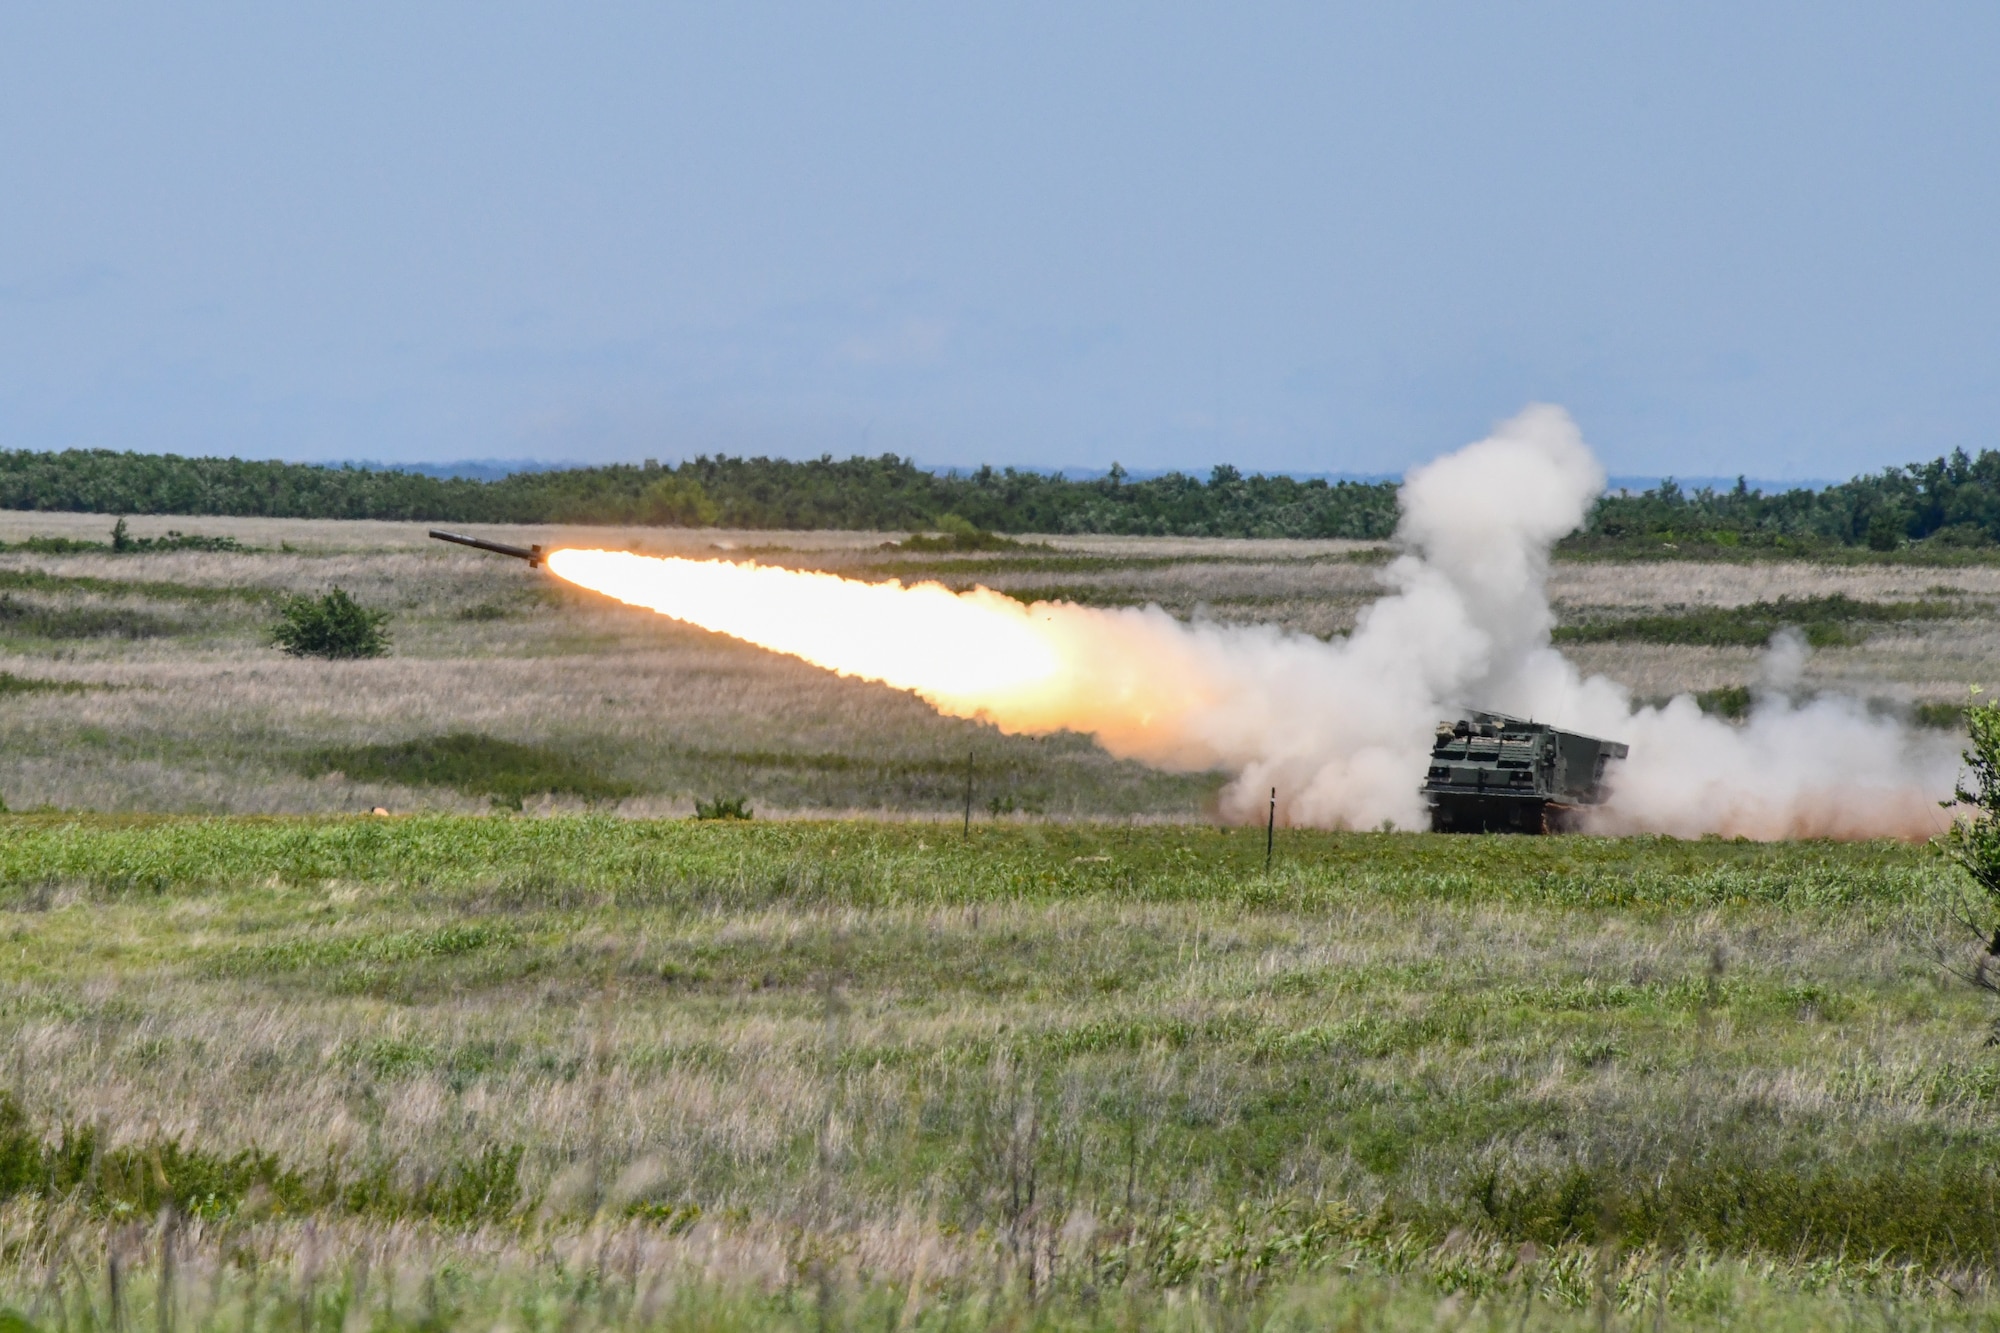 An M142 High Mobility Artillery Rocket System (HIMARS) fires a rocket for training at Fort Sill, Oklahoma, May 26, 2022. The HIMARS can fire precision-strike missiles up to 310 miles and other rockets up to 190 miles. (U.S. Air Force photo by Airman 1st Class Miyah Gray)